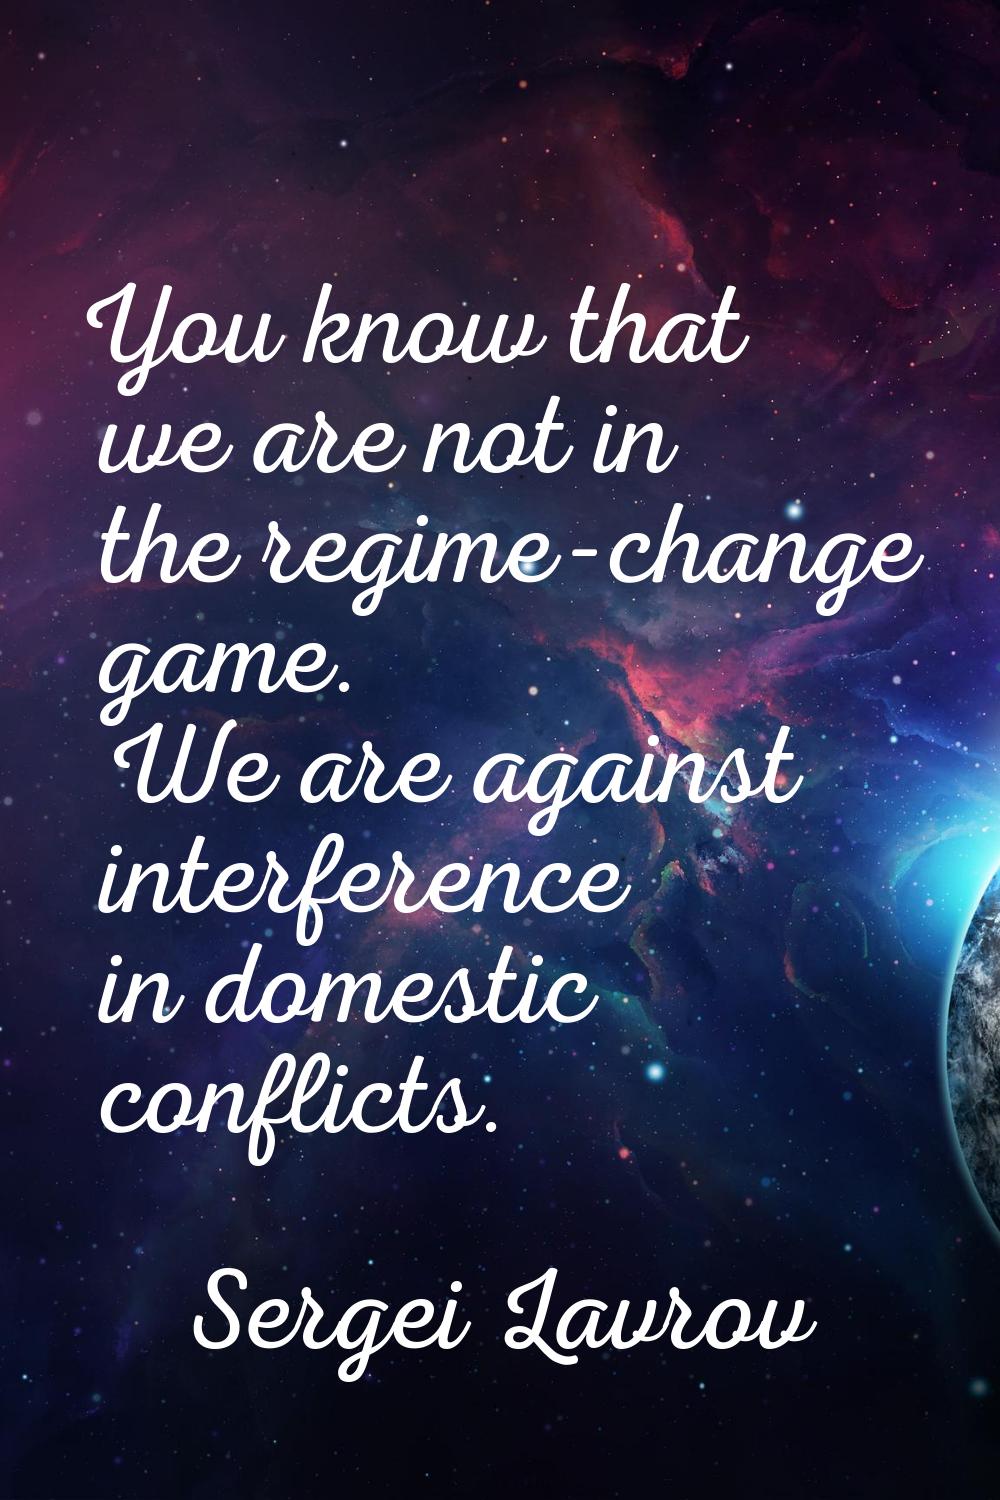 You know that we are not in the regime-change game. We are against interference in domestic conflic